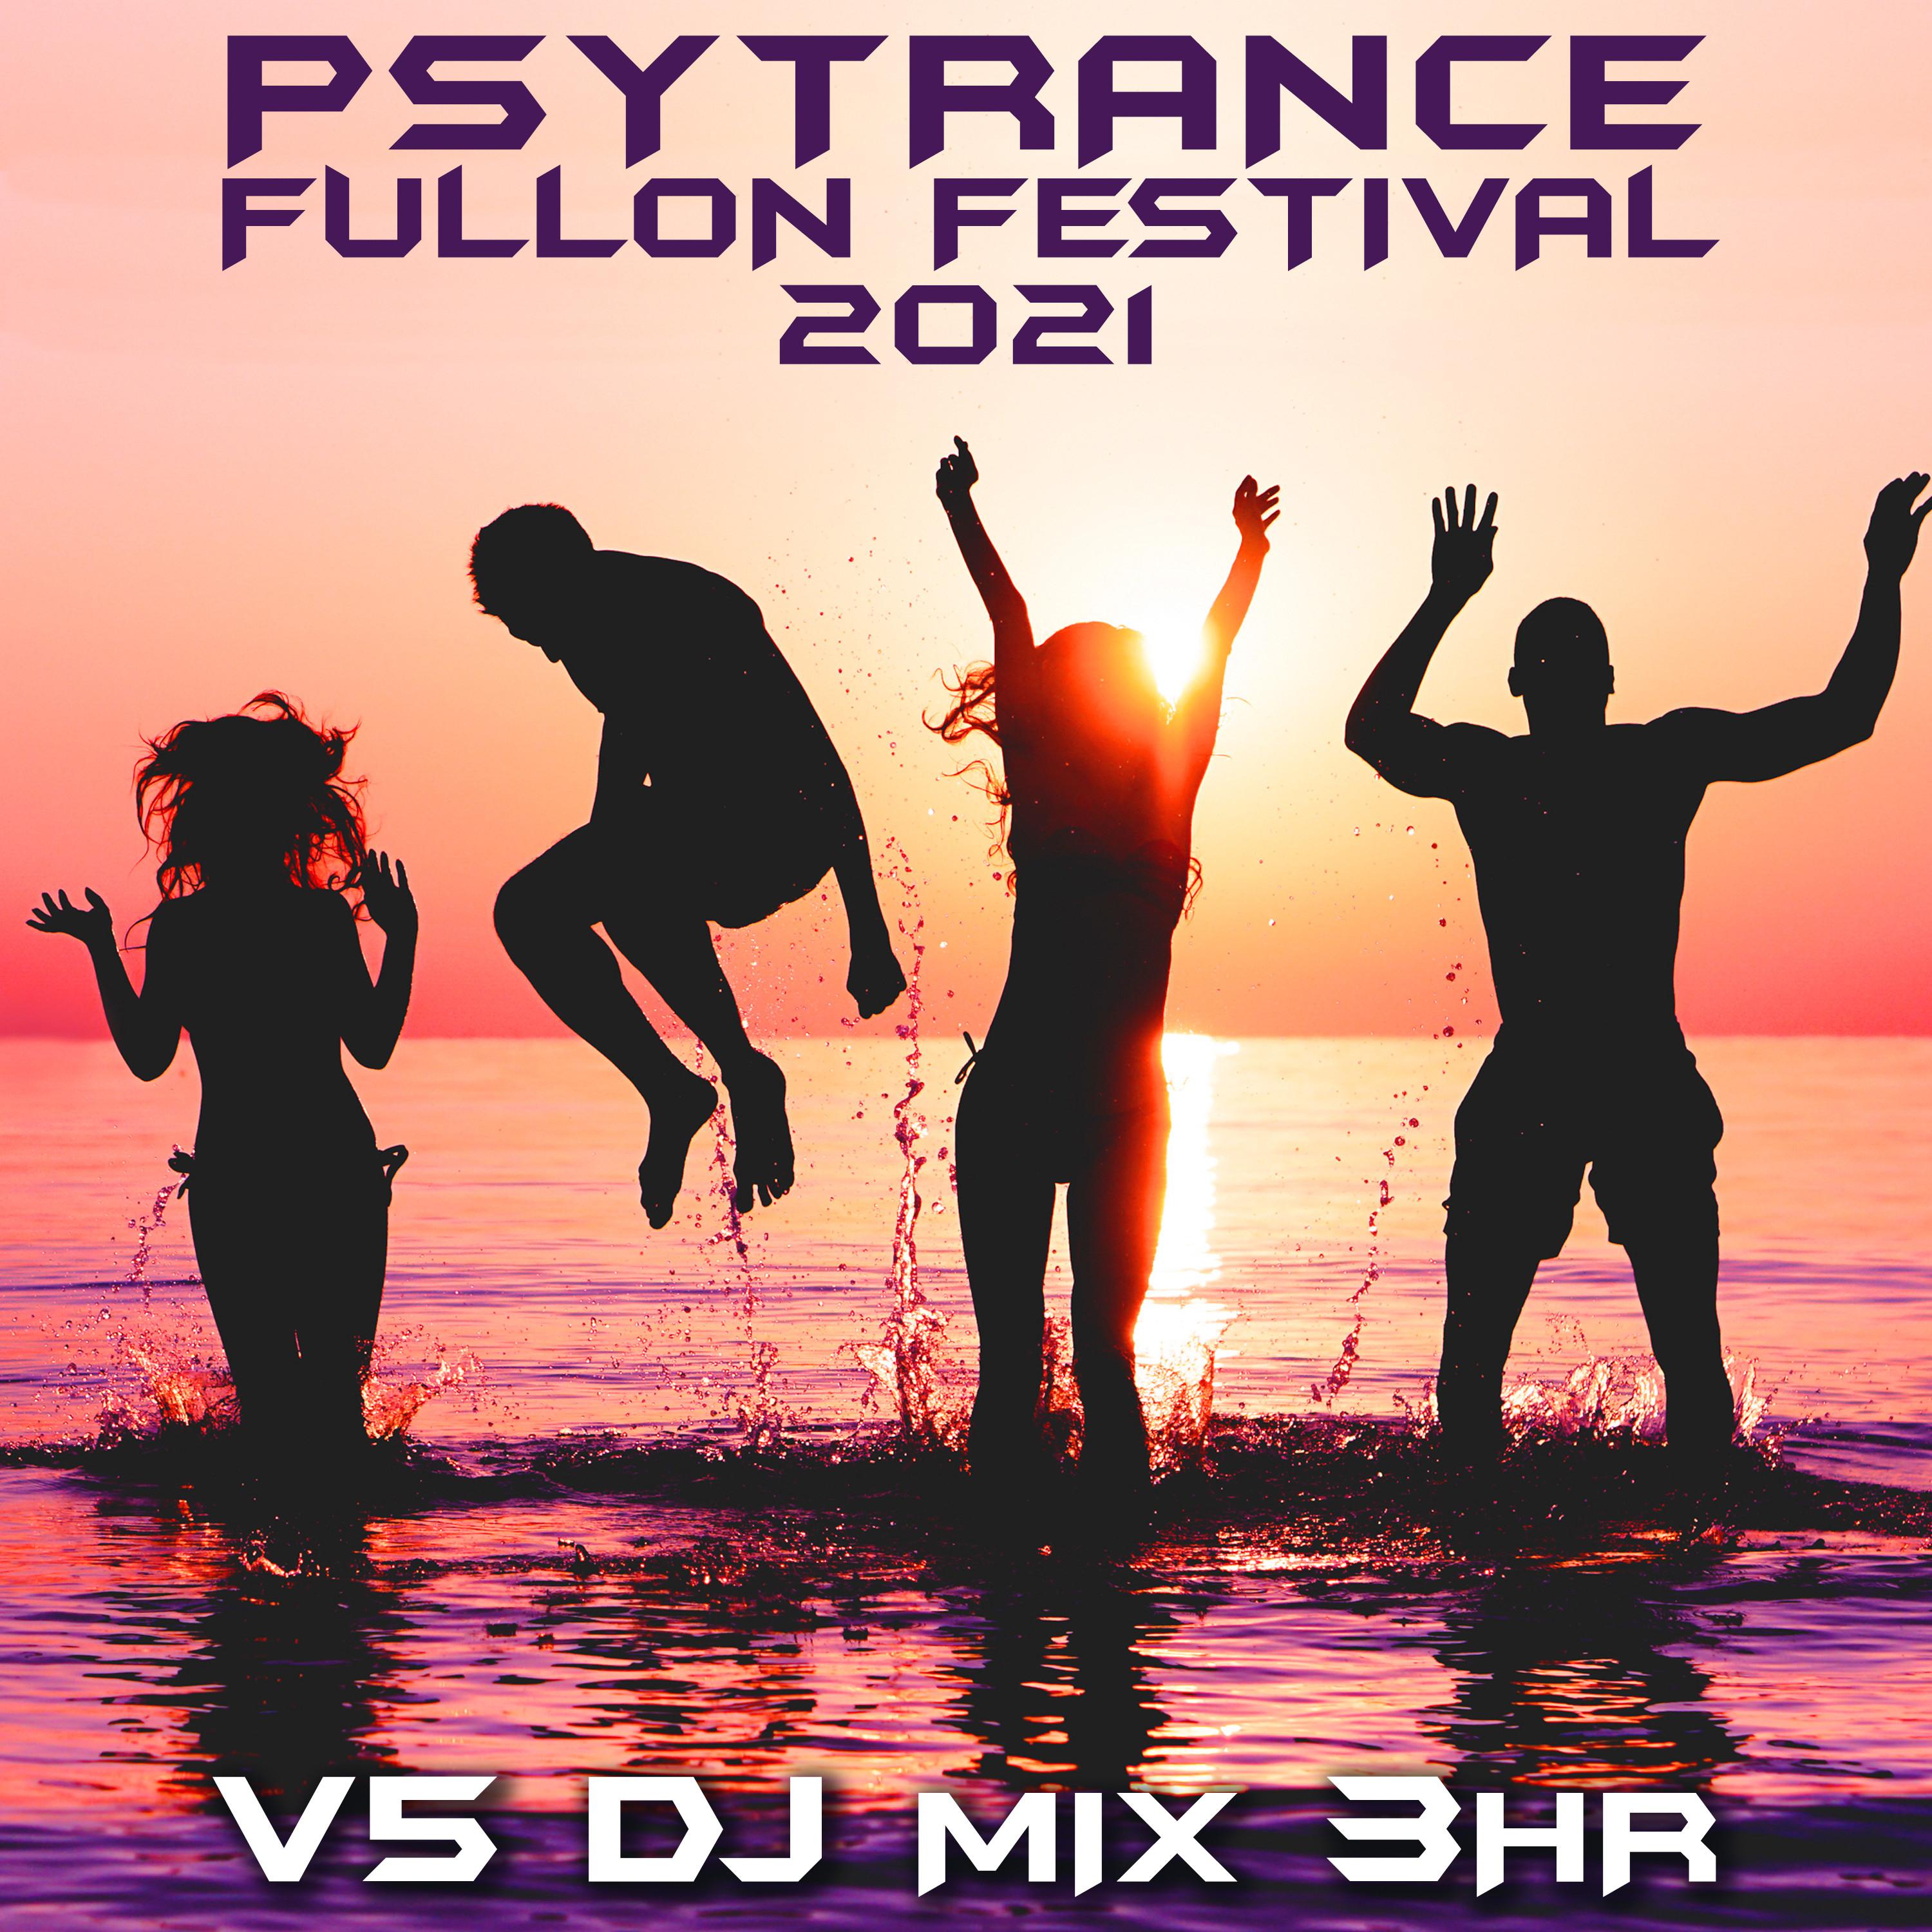 Astro-D - Reflection Of Time (Psy Trance 2021 Mix) (Mixed)